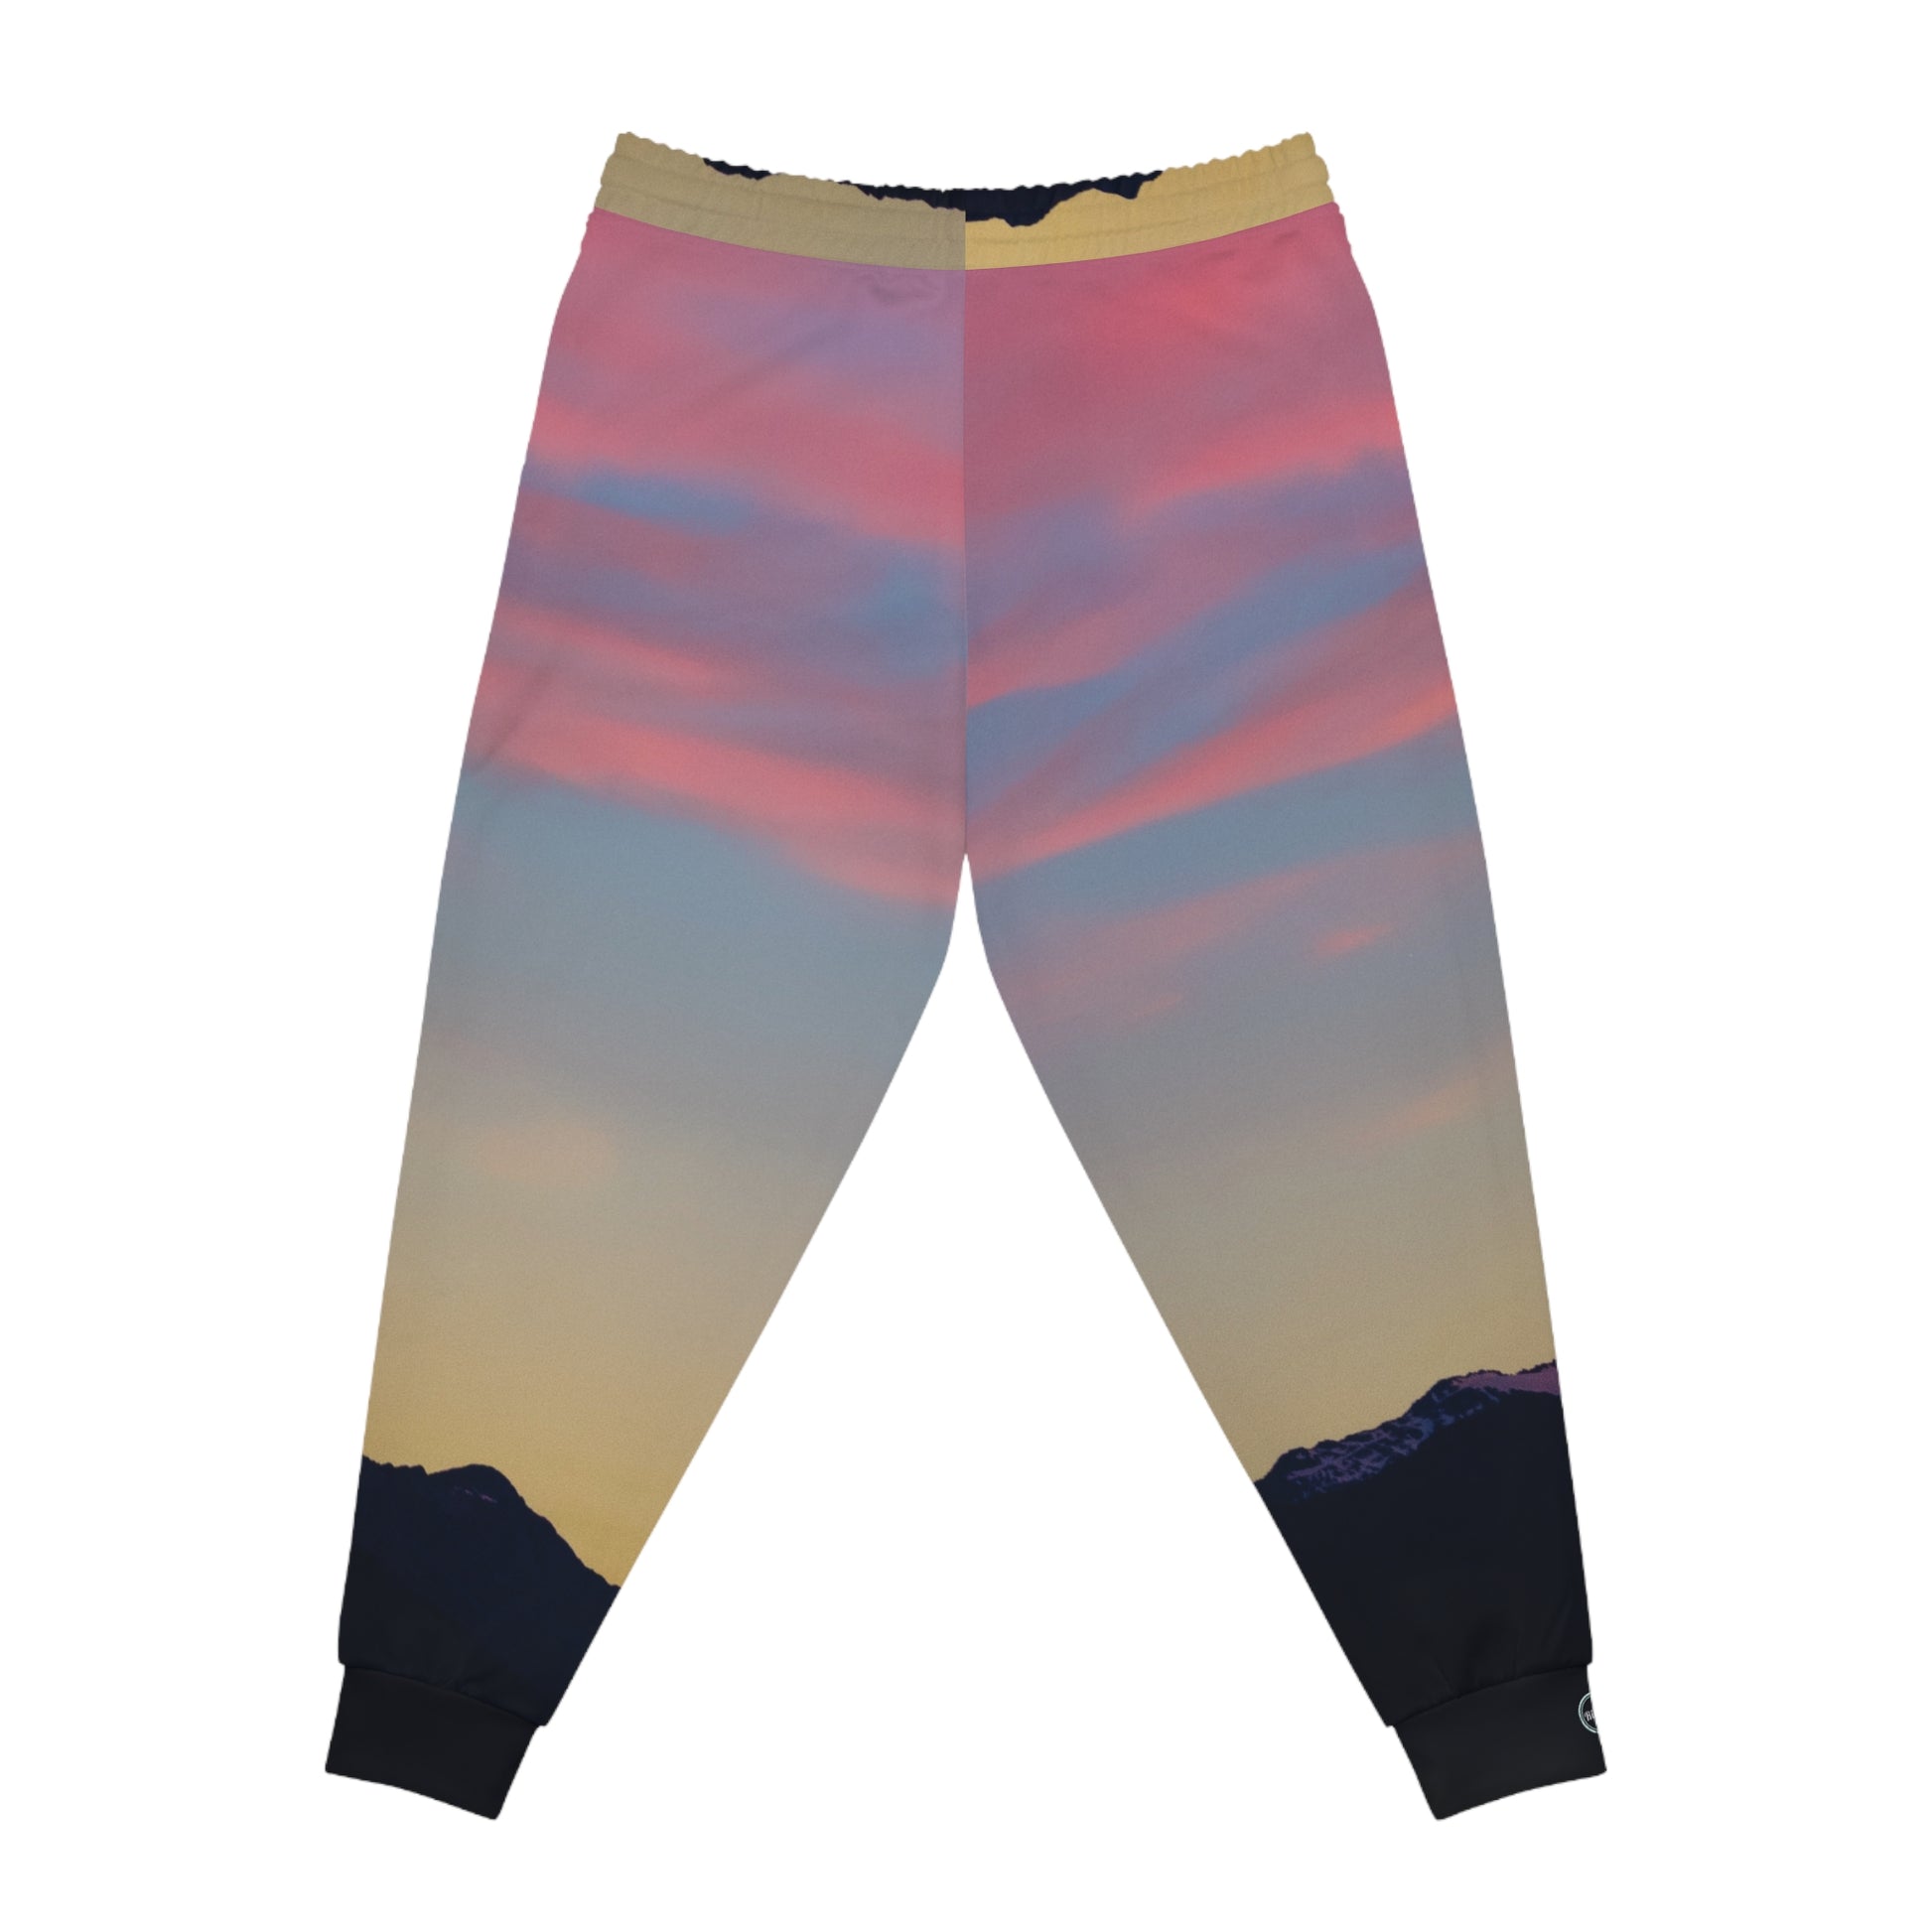 Athletic Joggers For Women | Rox